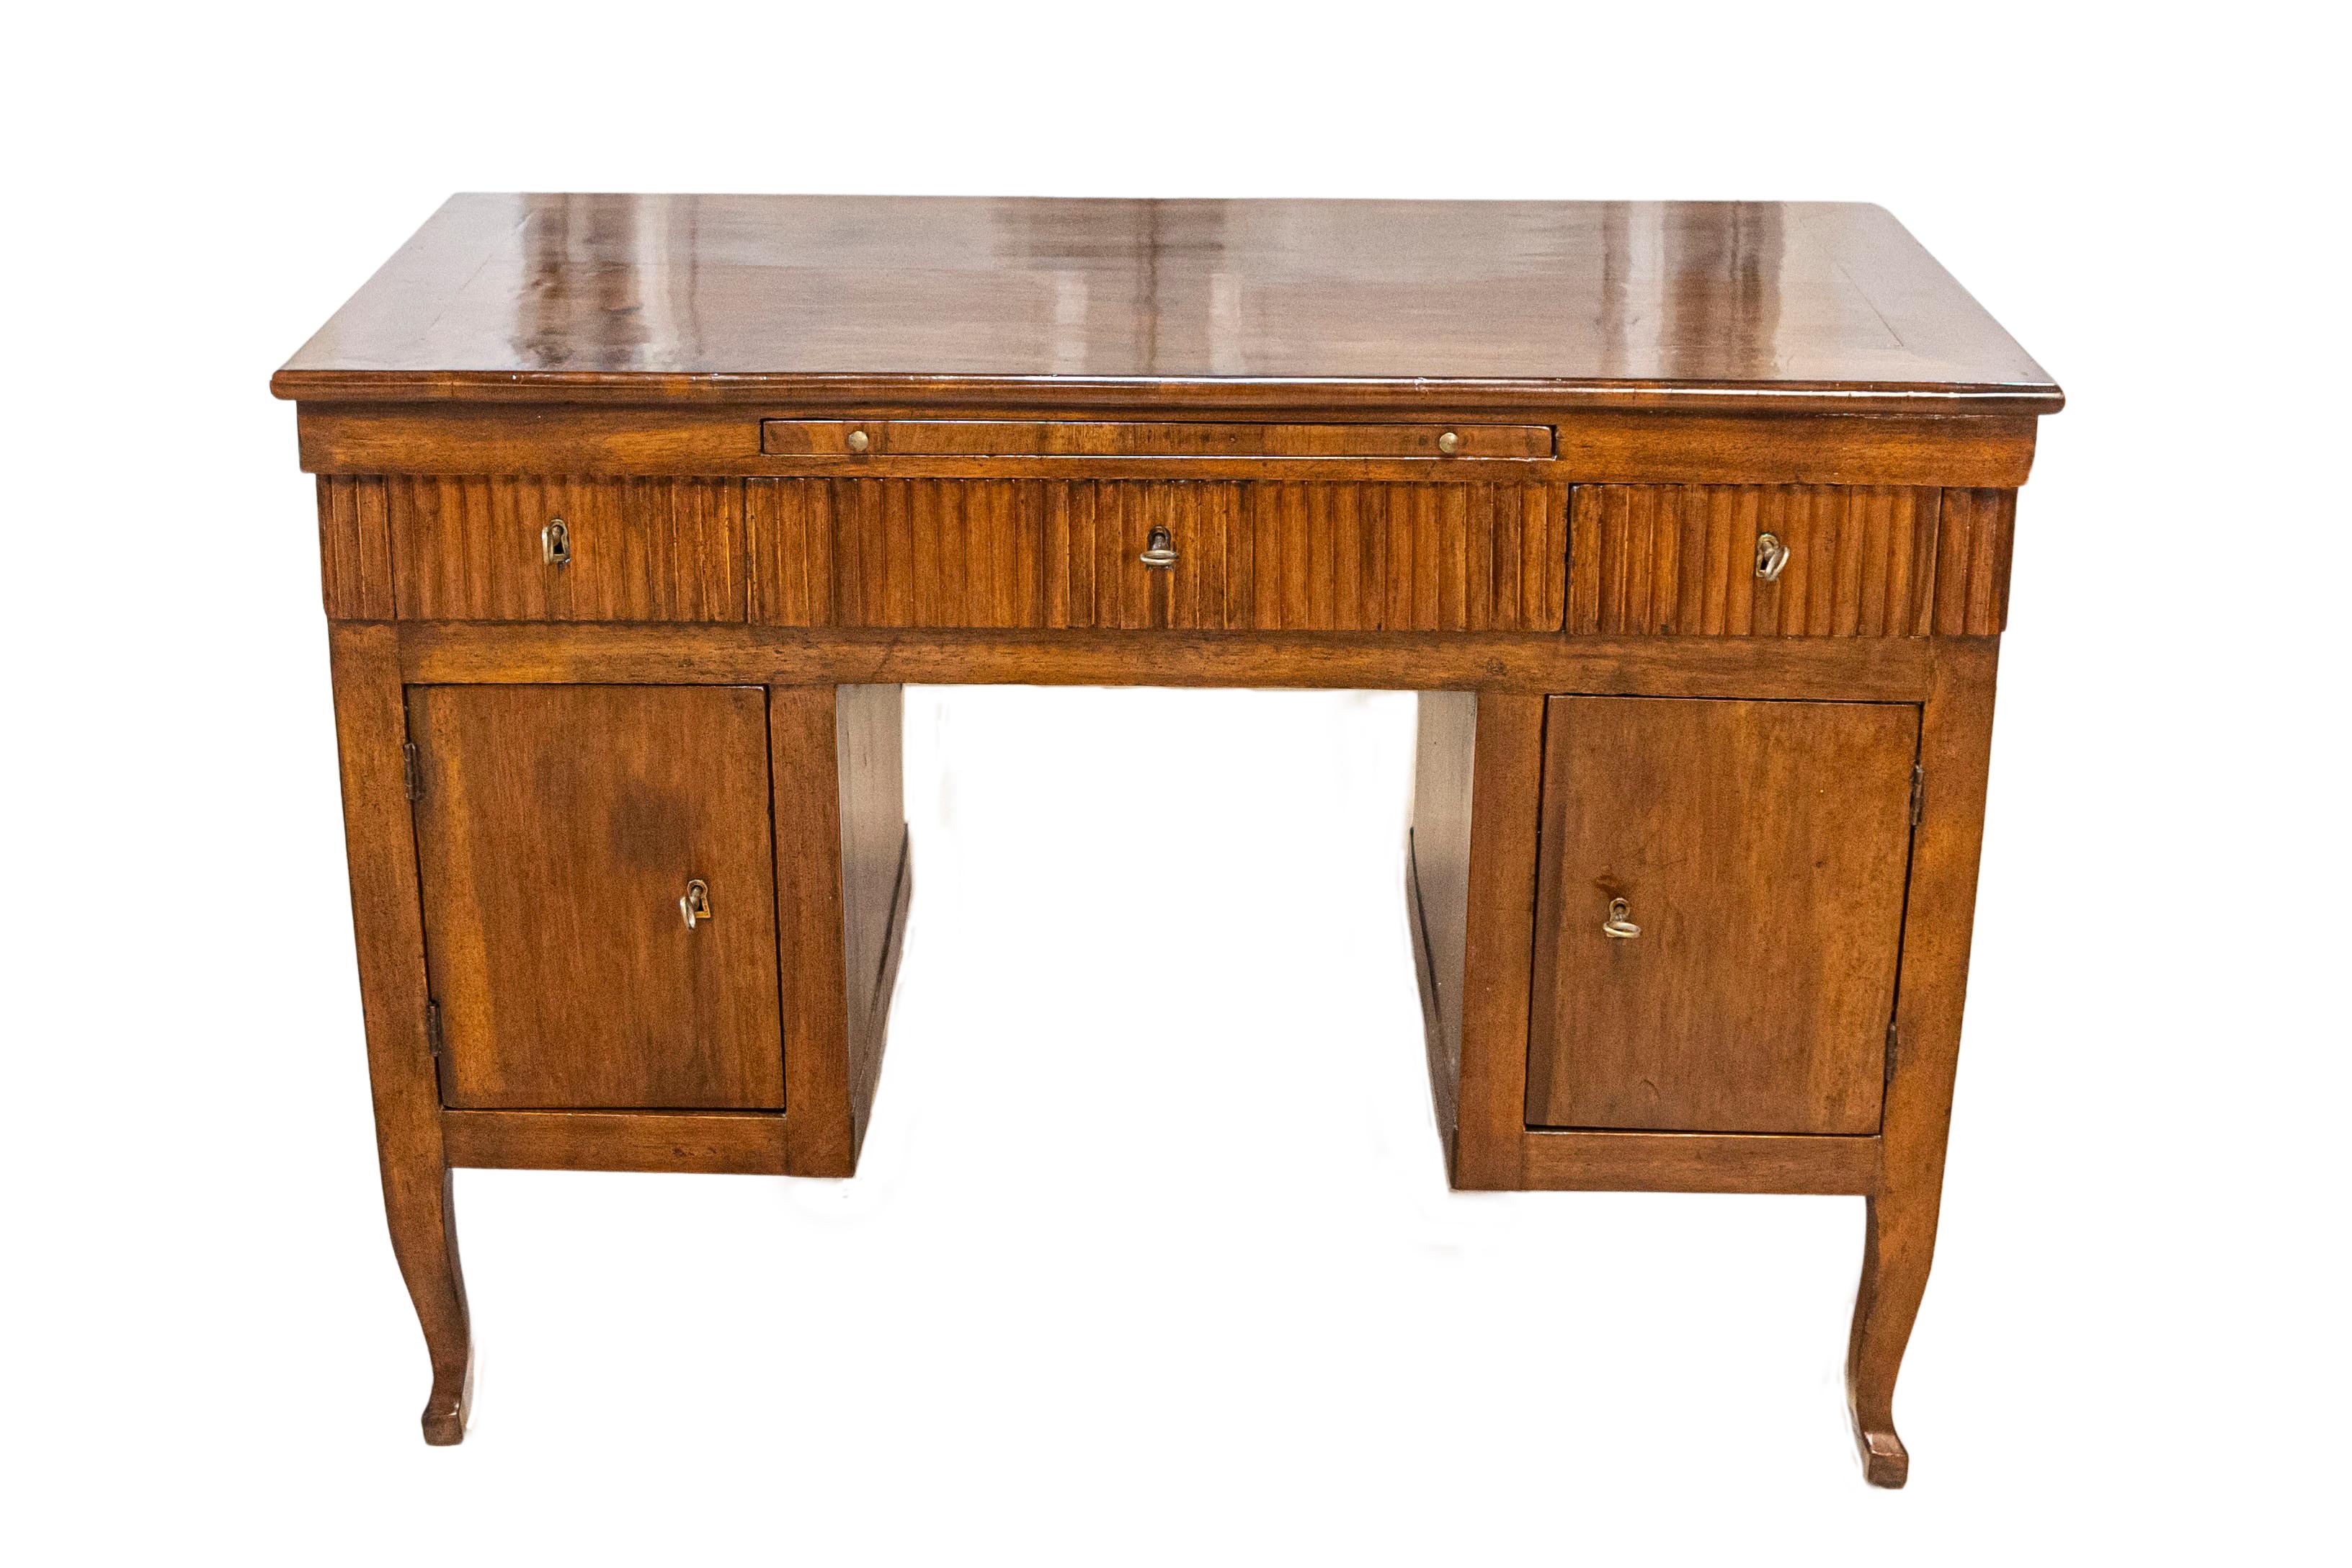 An Italian walnut desk from the 18th century with three drawers, pull-out, two doors and curving legs. This exquisite Italian walnut desk from the 18th century combines timeless style with functional elegance. It features three front drawers and two